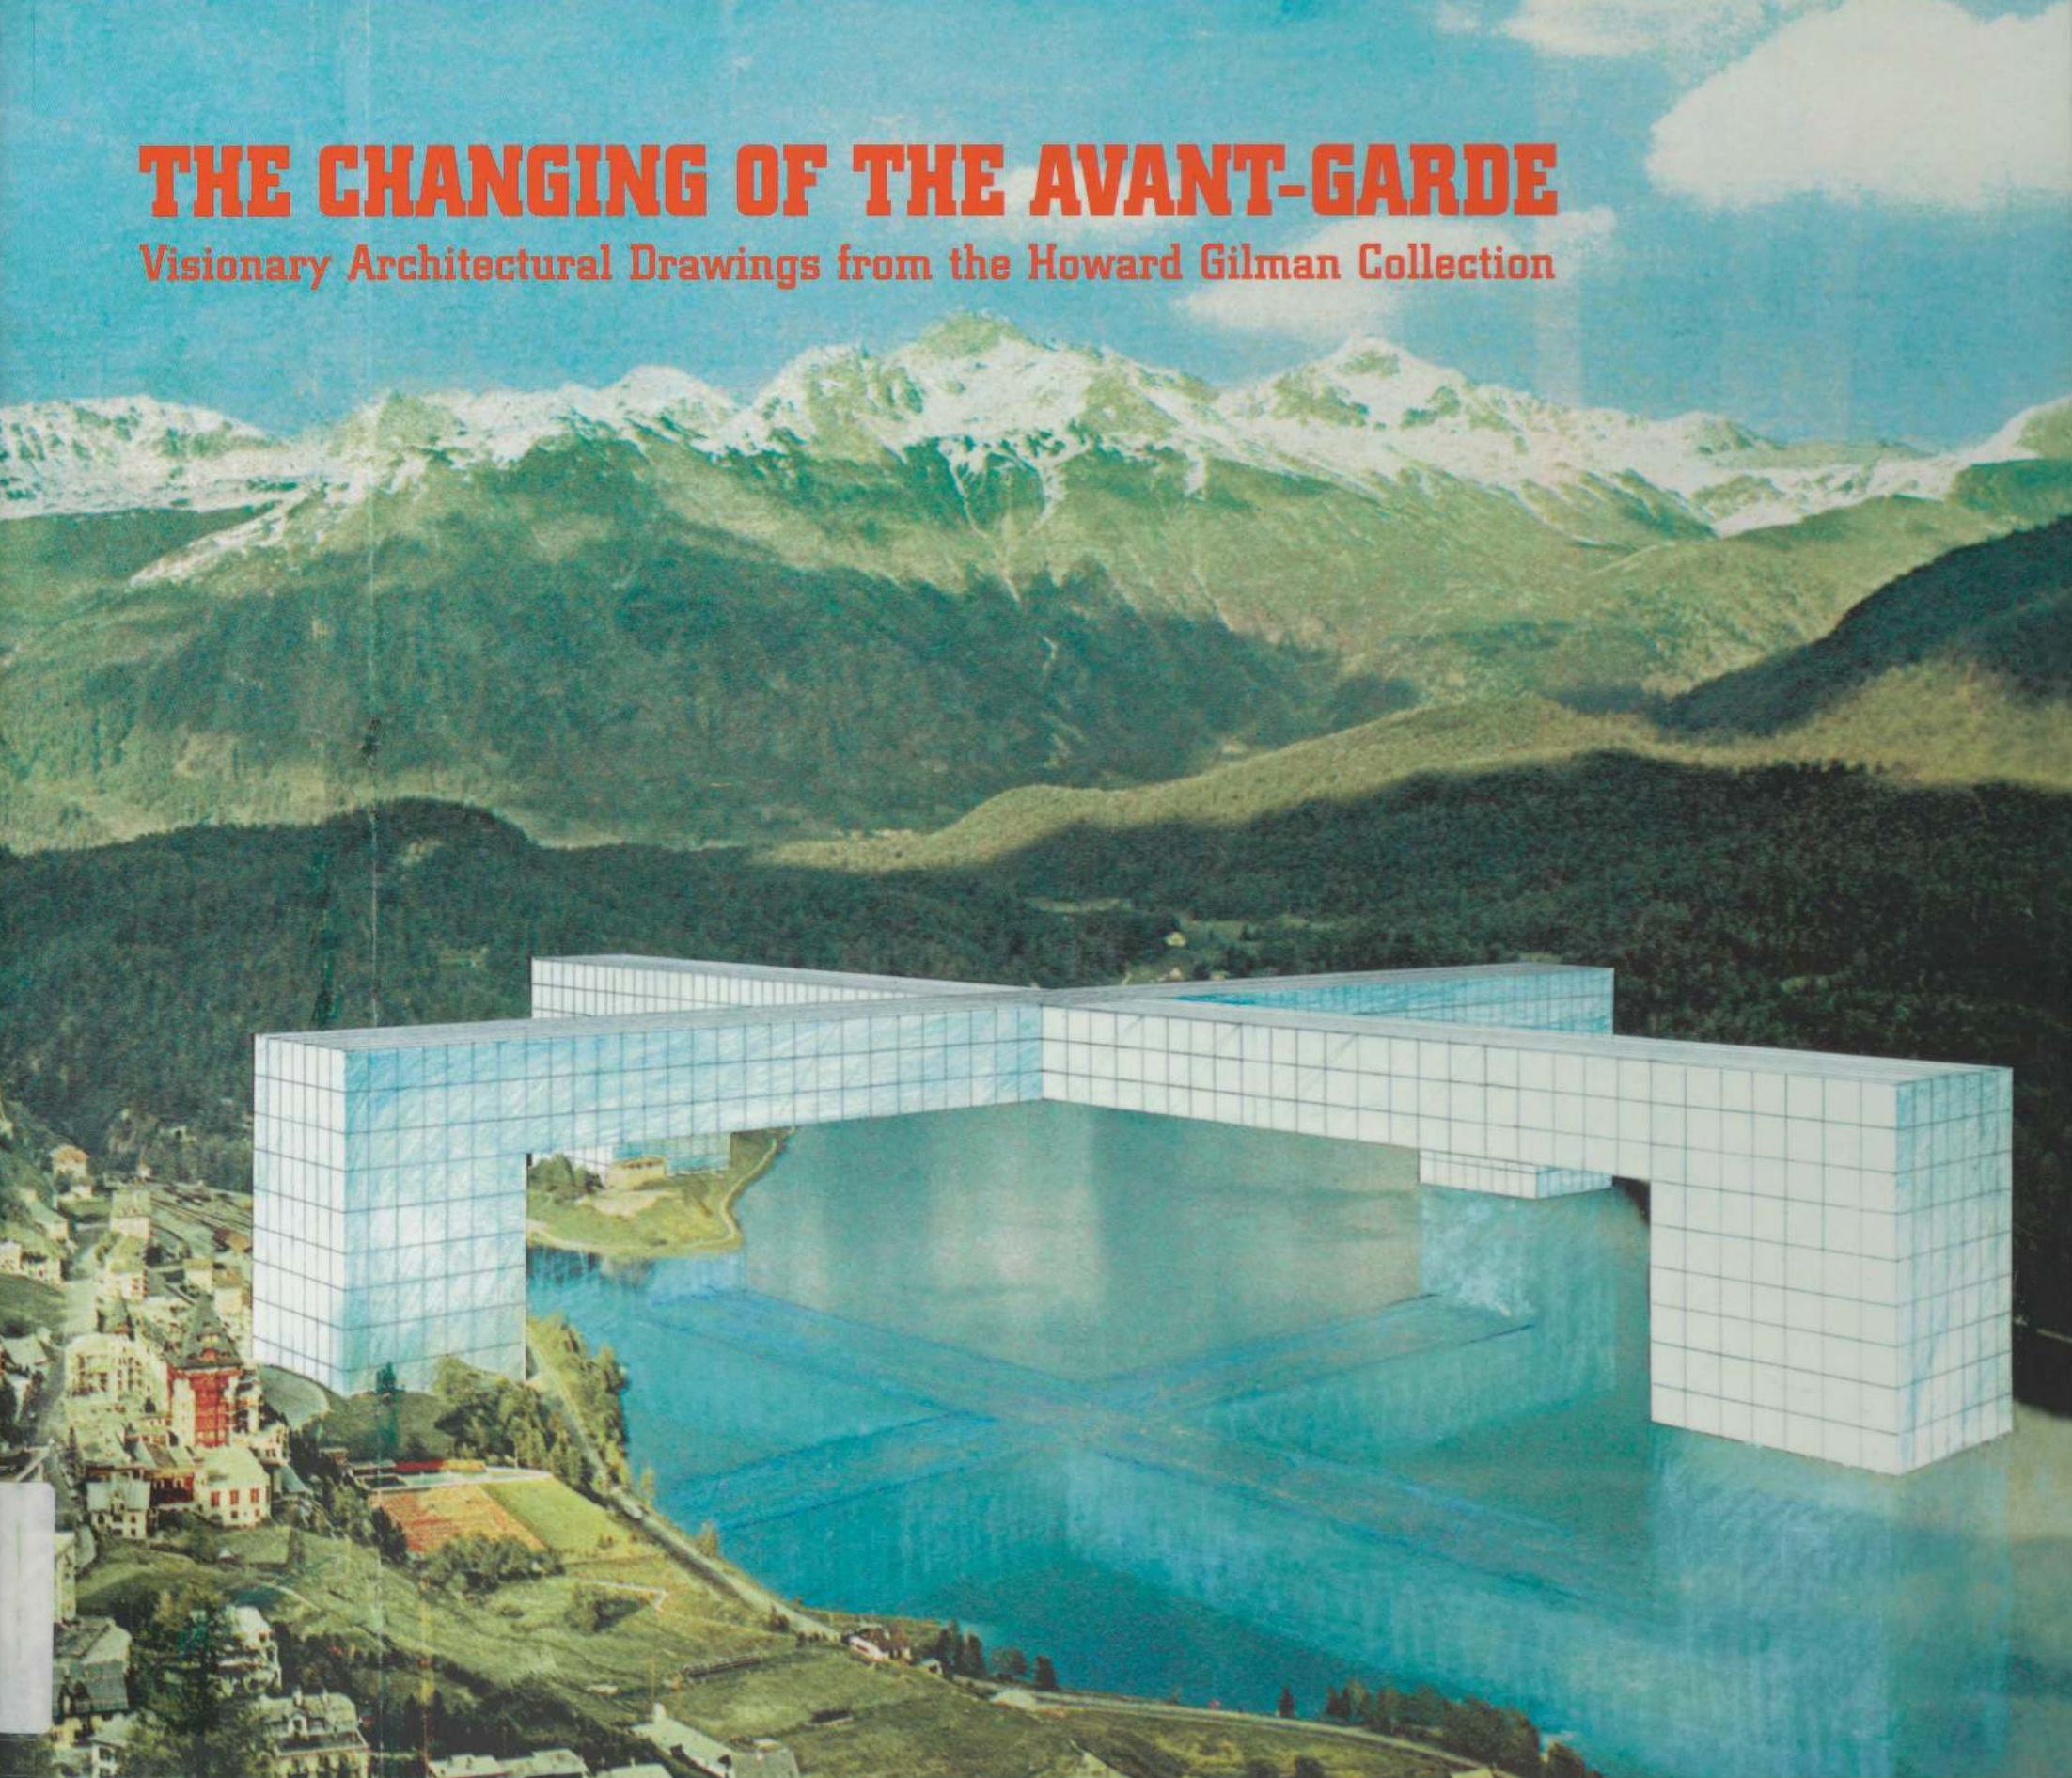 The changing of the avant-garde : Visionary architectural drawings from the Howard Gilman collection / Contributions by Terence Riley, Sarah Deyong, Marco De Michelis, Pierre Apraxine, Paola Antonelli, Tina di Carlo, and Bevin Cline. — New York : The Museum of Modern Art, 2002